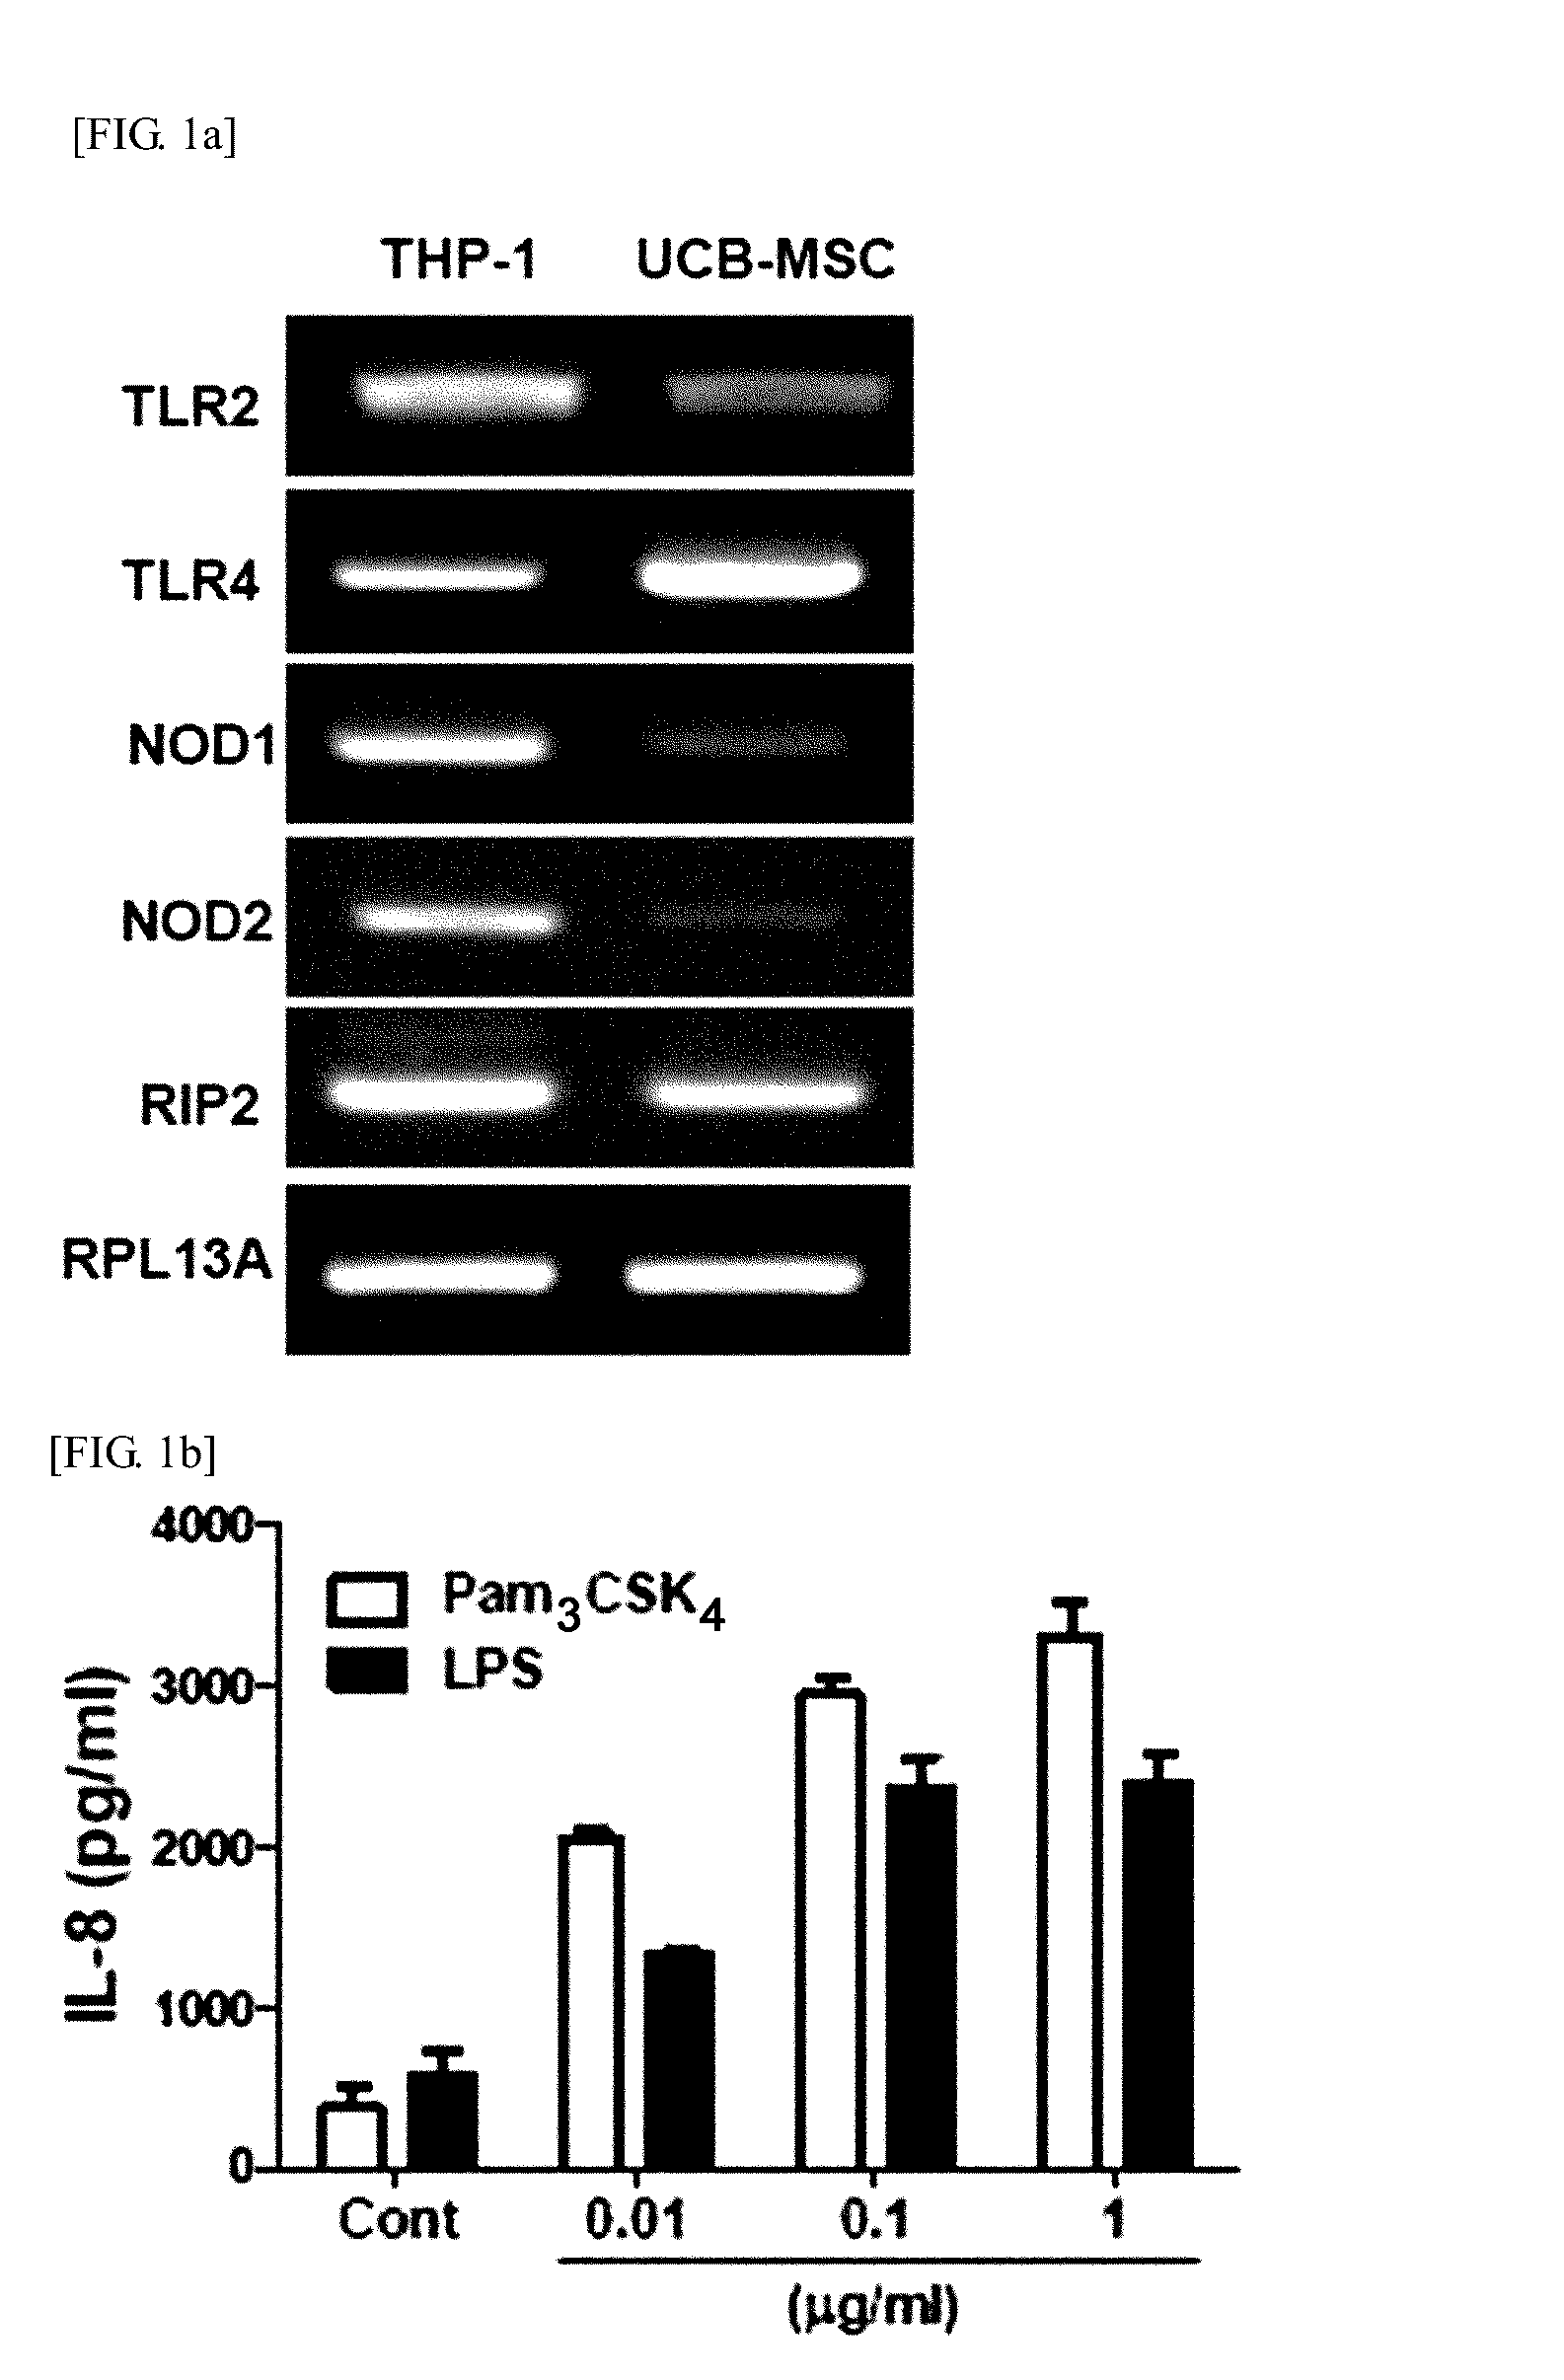 Pharmaceutical Composition Comprising Stem Cells Treated with NOD2 Agonist or Culture Thereof for Prevention and Treatment of Immune Disorders and Inflammatory Diseases